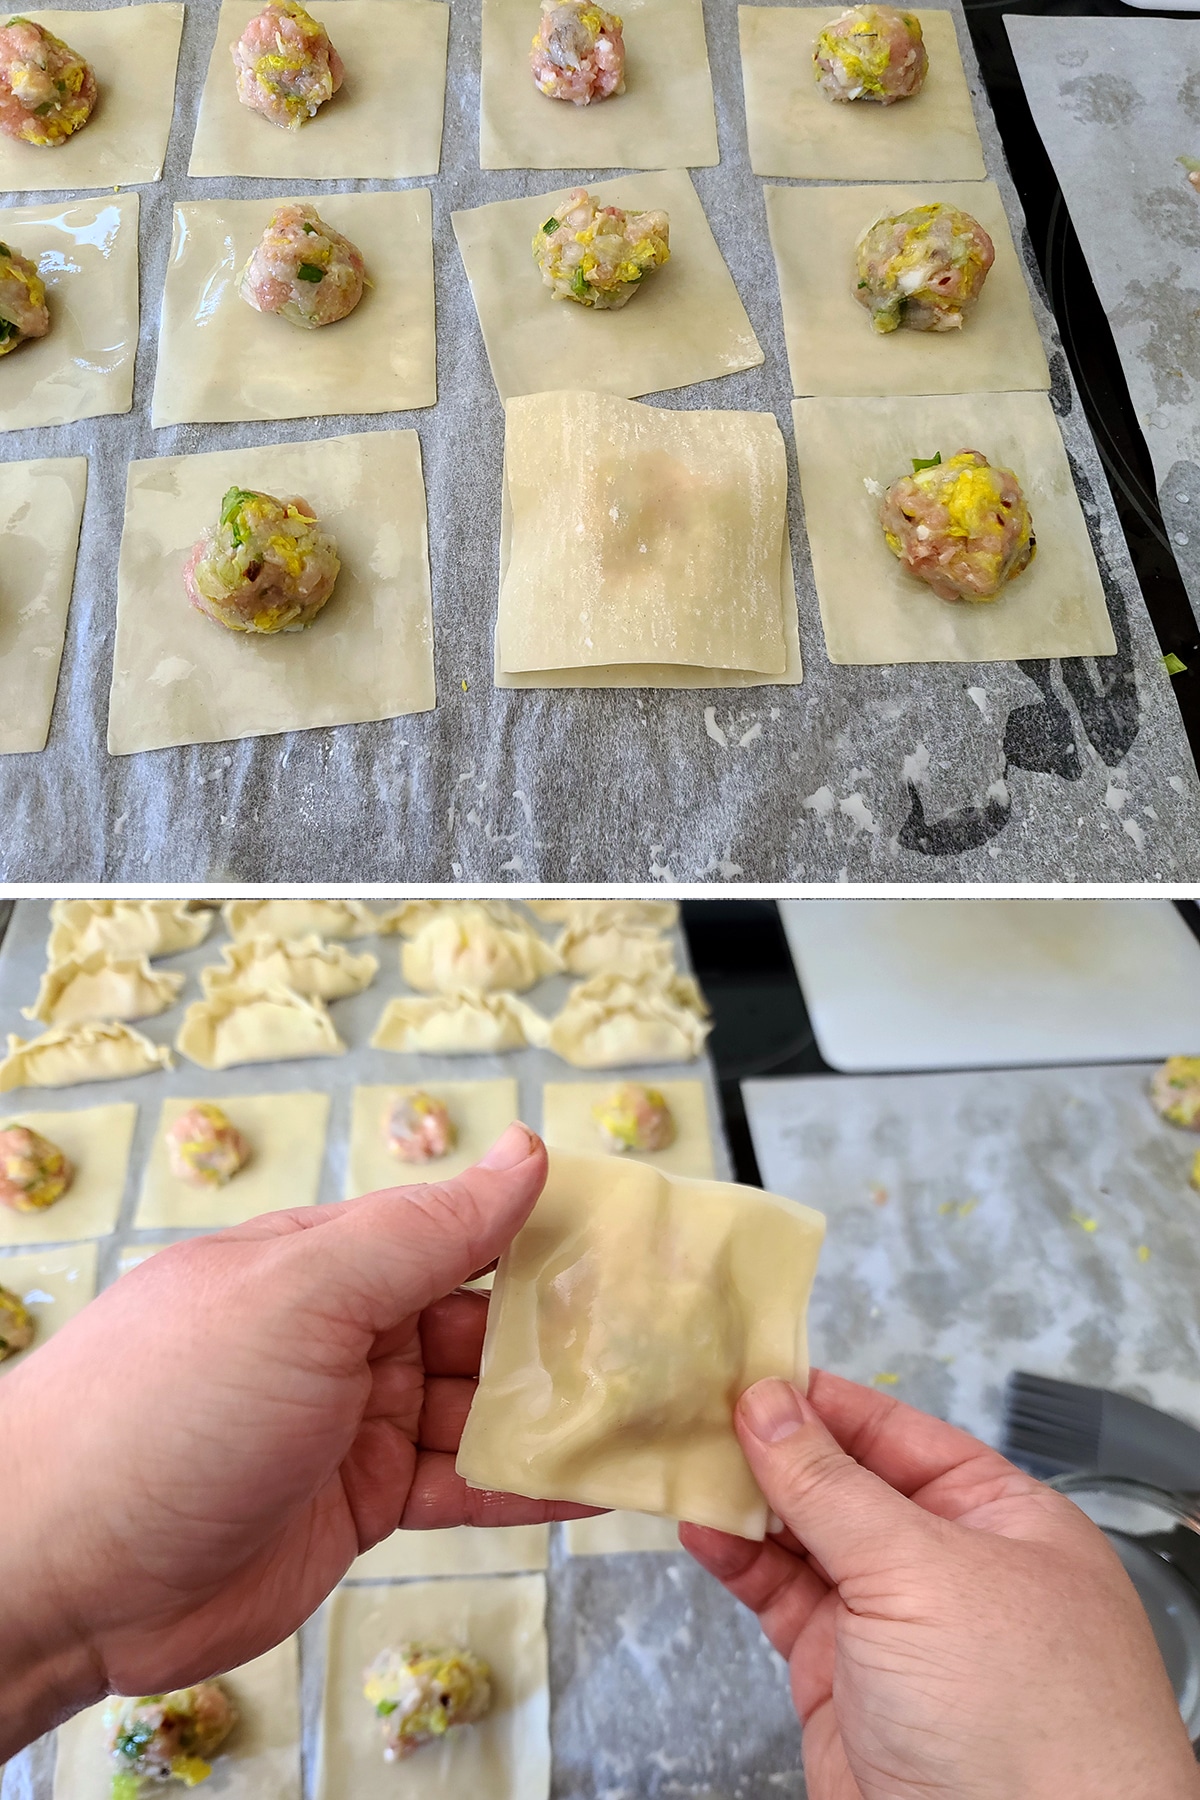 A two part image showing wrappers being added to the top of each wrapper and filing combo, and hands forming a raviolo.